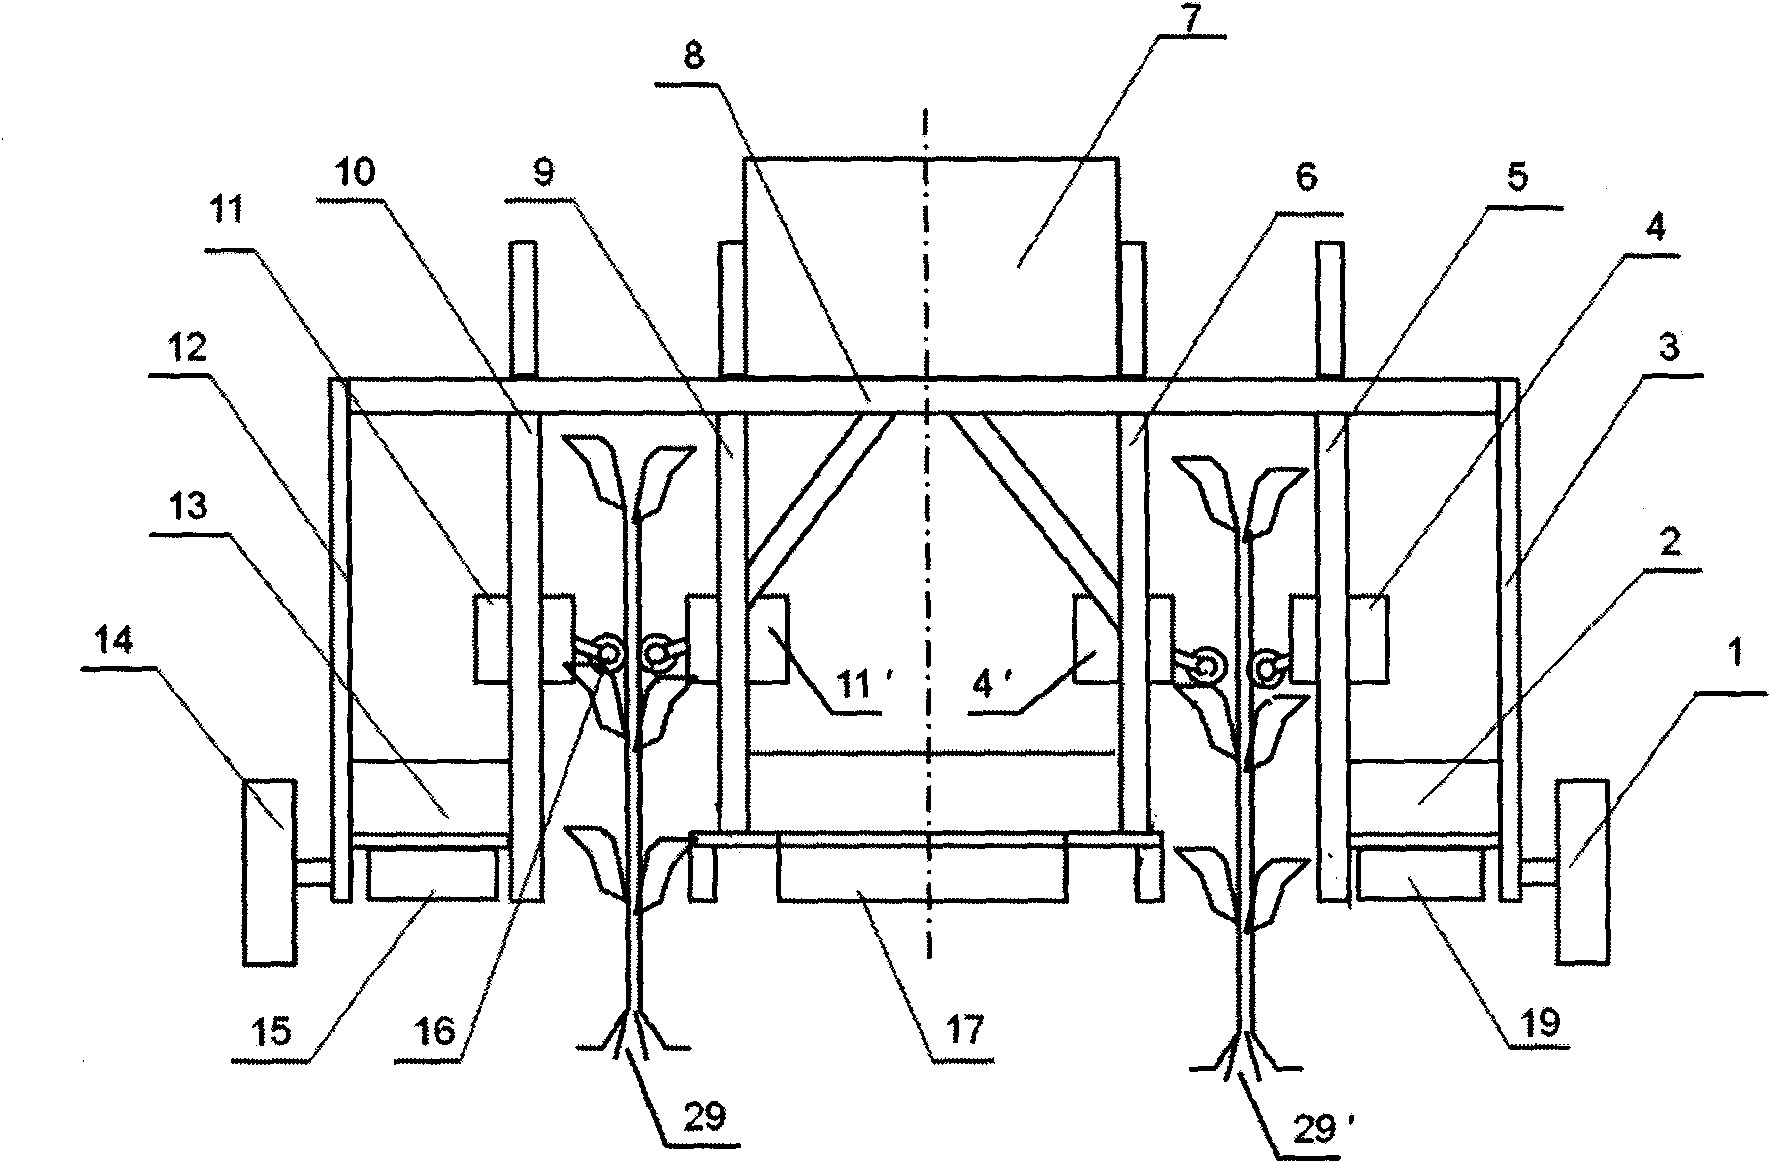 Tobacco harvesting machine with roller cutter head